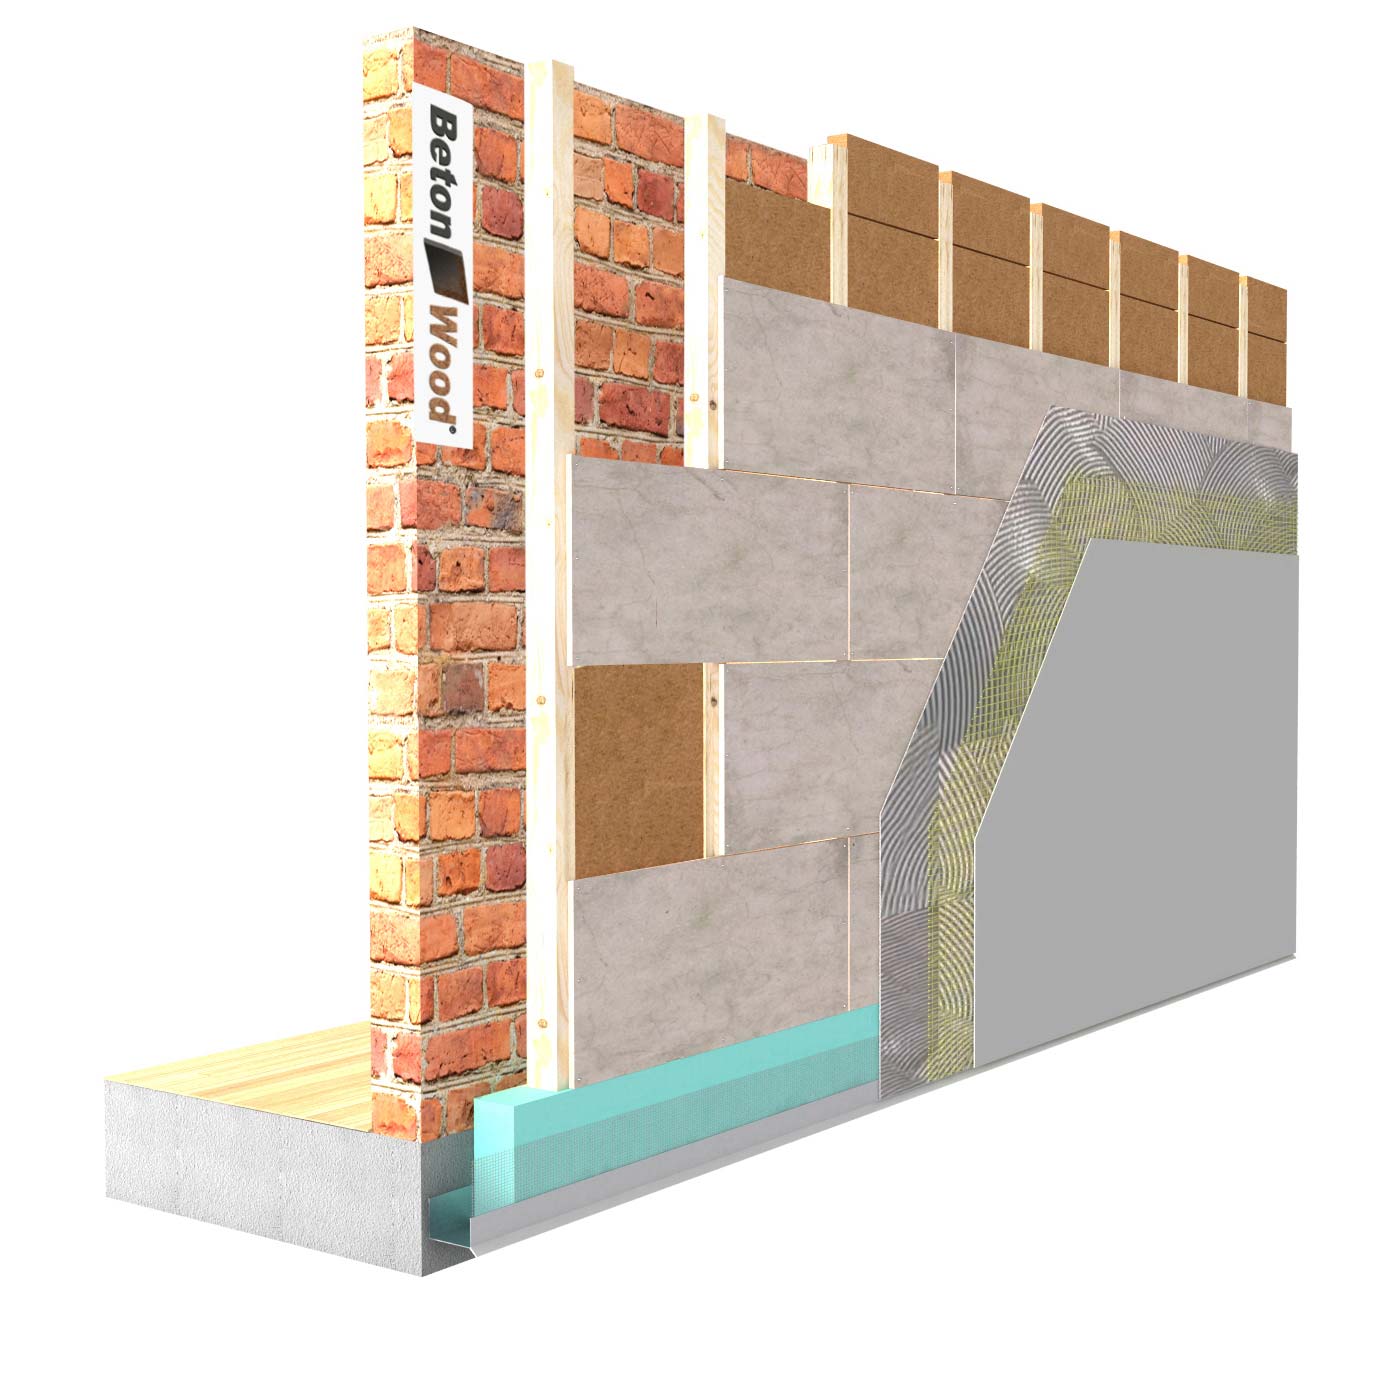 External insulation system with Therm dry wood fiber on masonry